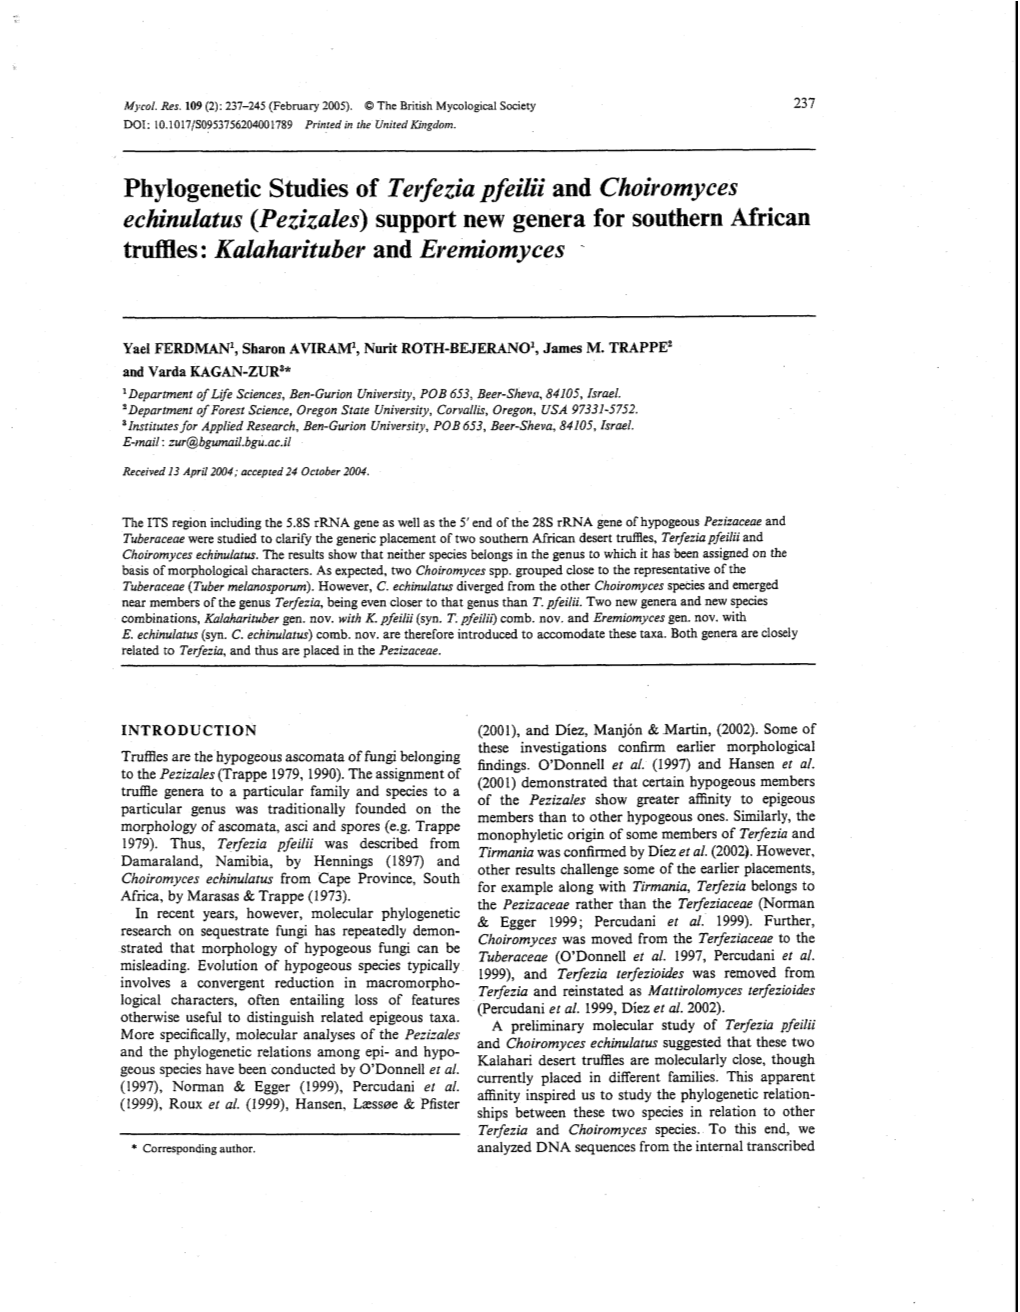 Phylogenetic Studies of Tevfezia P Feilii and Choivomyces Ecltinulatus